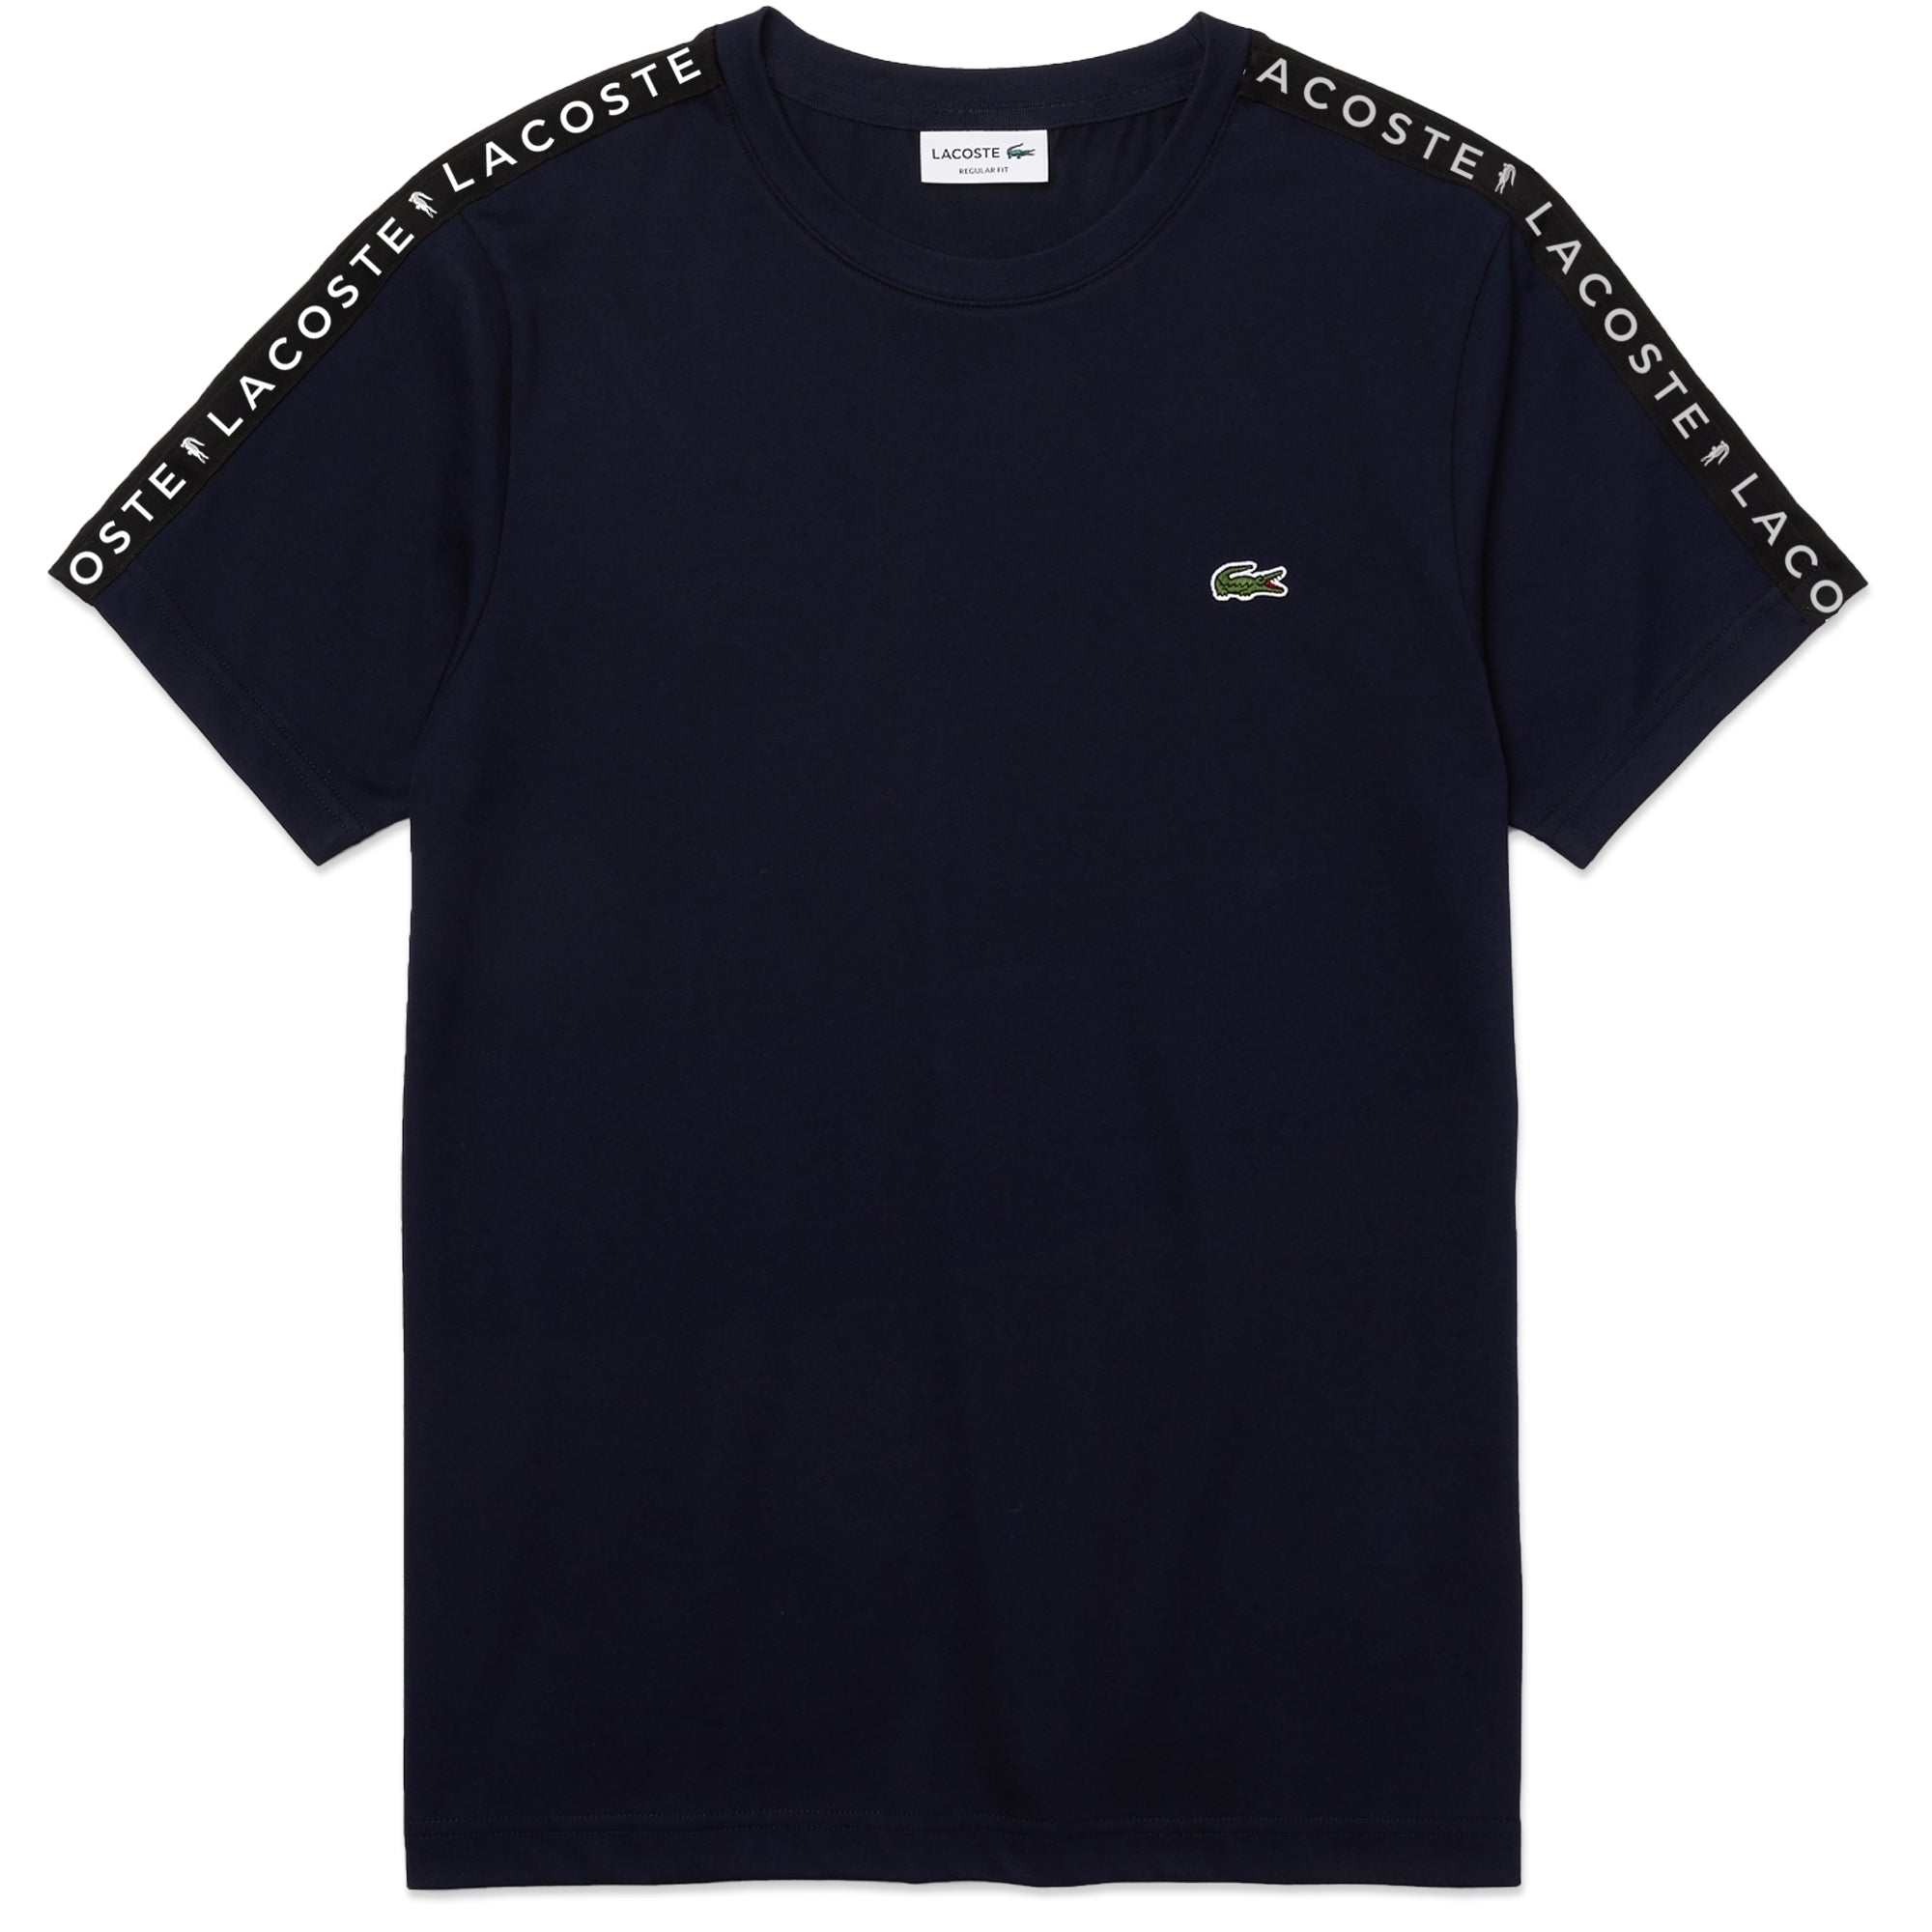 Lacoste Tape T-Shirt TH7079 - Navy